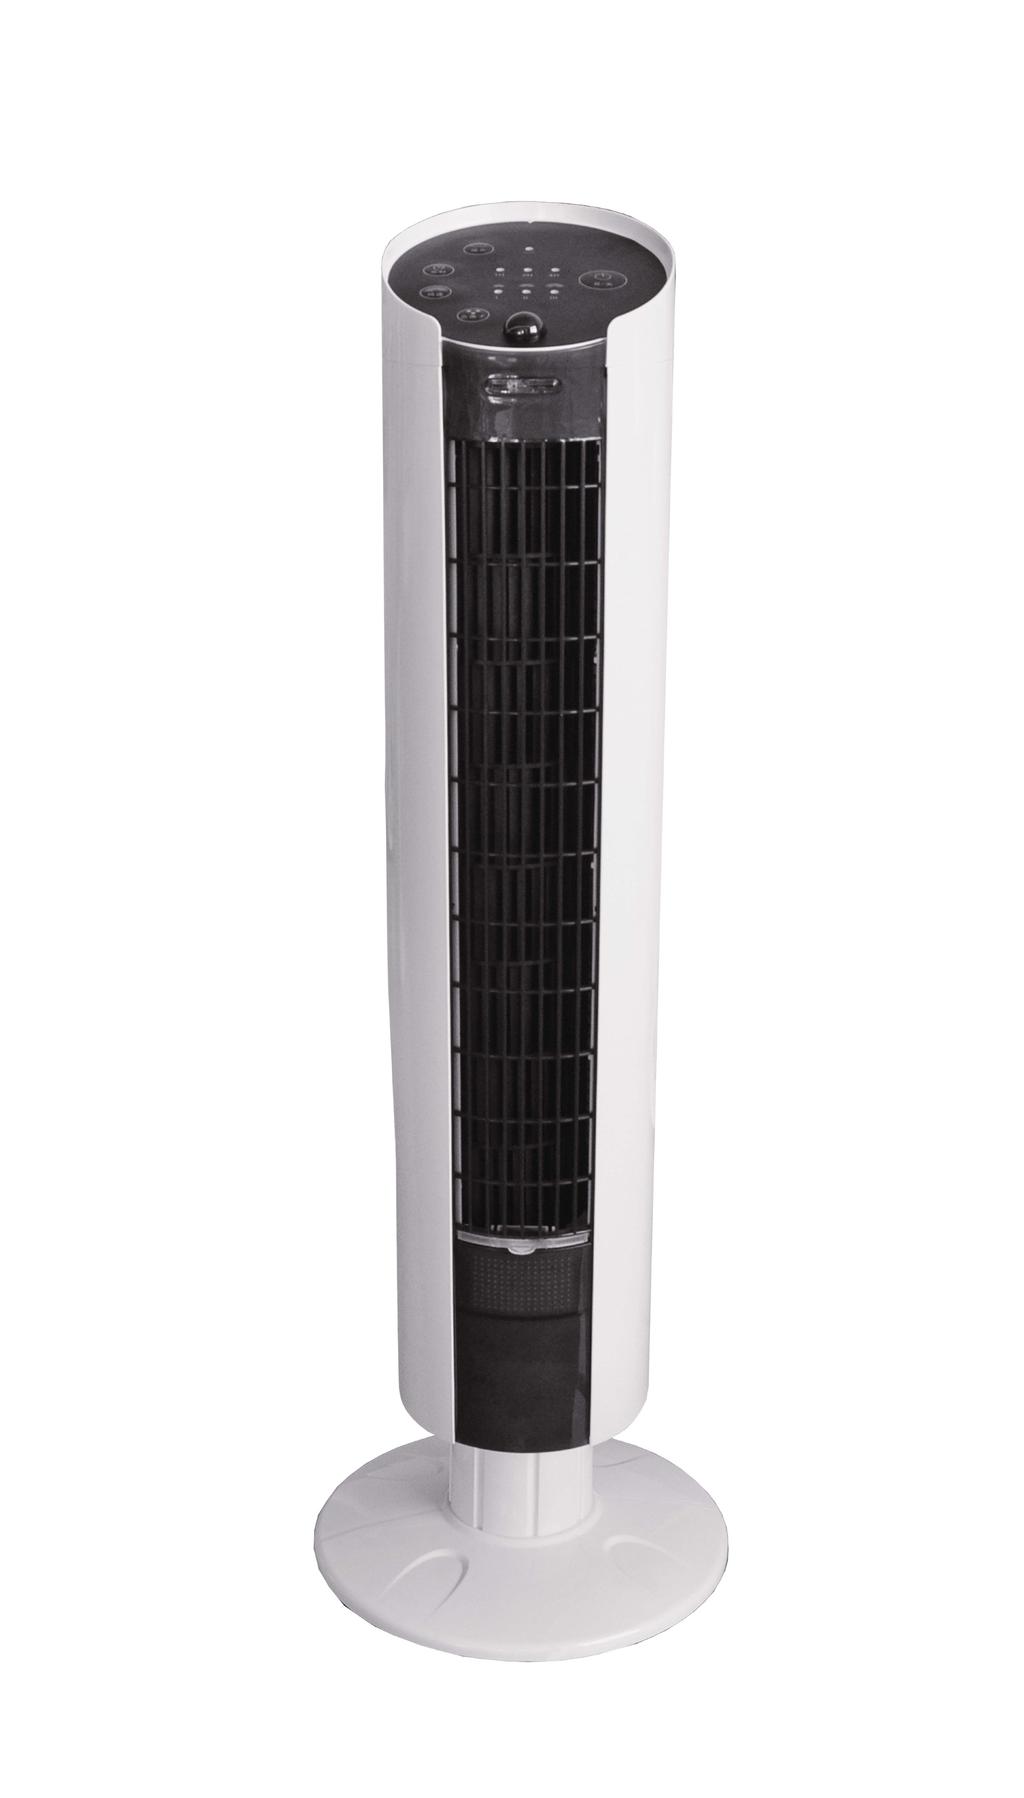 Remote Tower Fan Product Code: MY146 USER